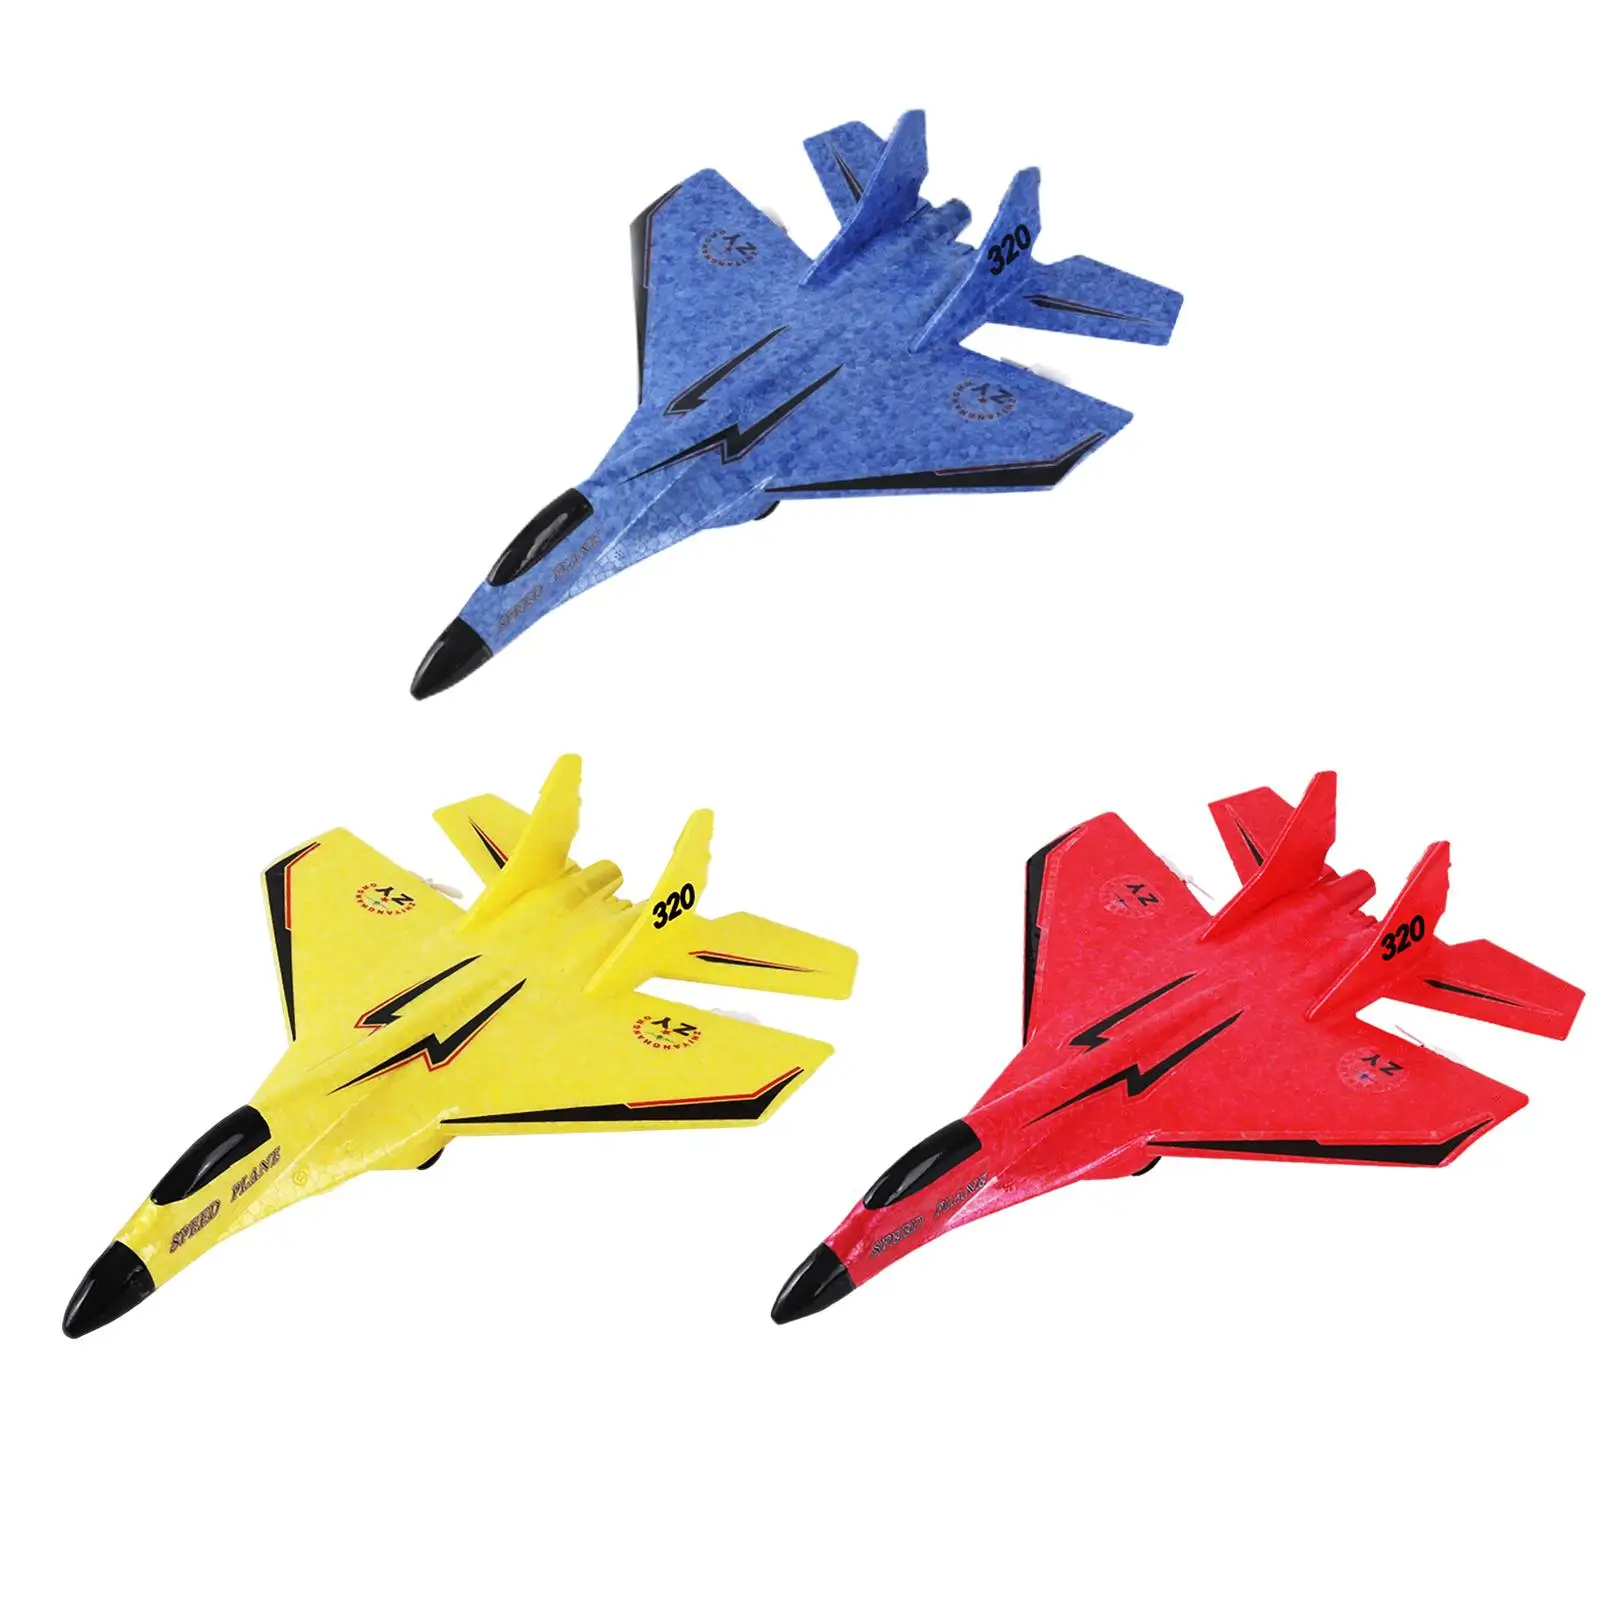 2 Plane Portable Ready to Easy to Control with Light Gift Foam RC Airplane RC Glider Aircraft for Kids Boys Girls